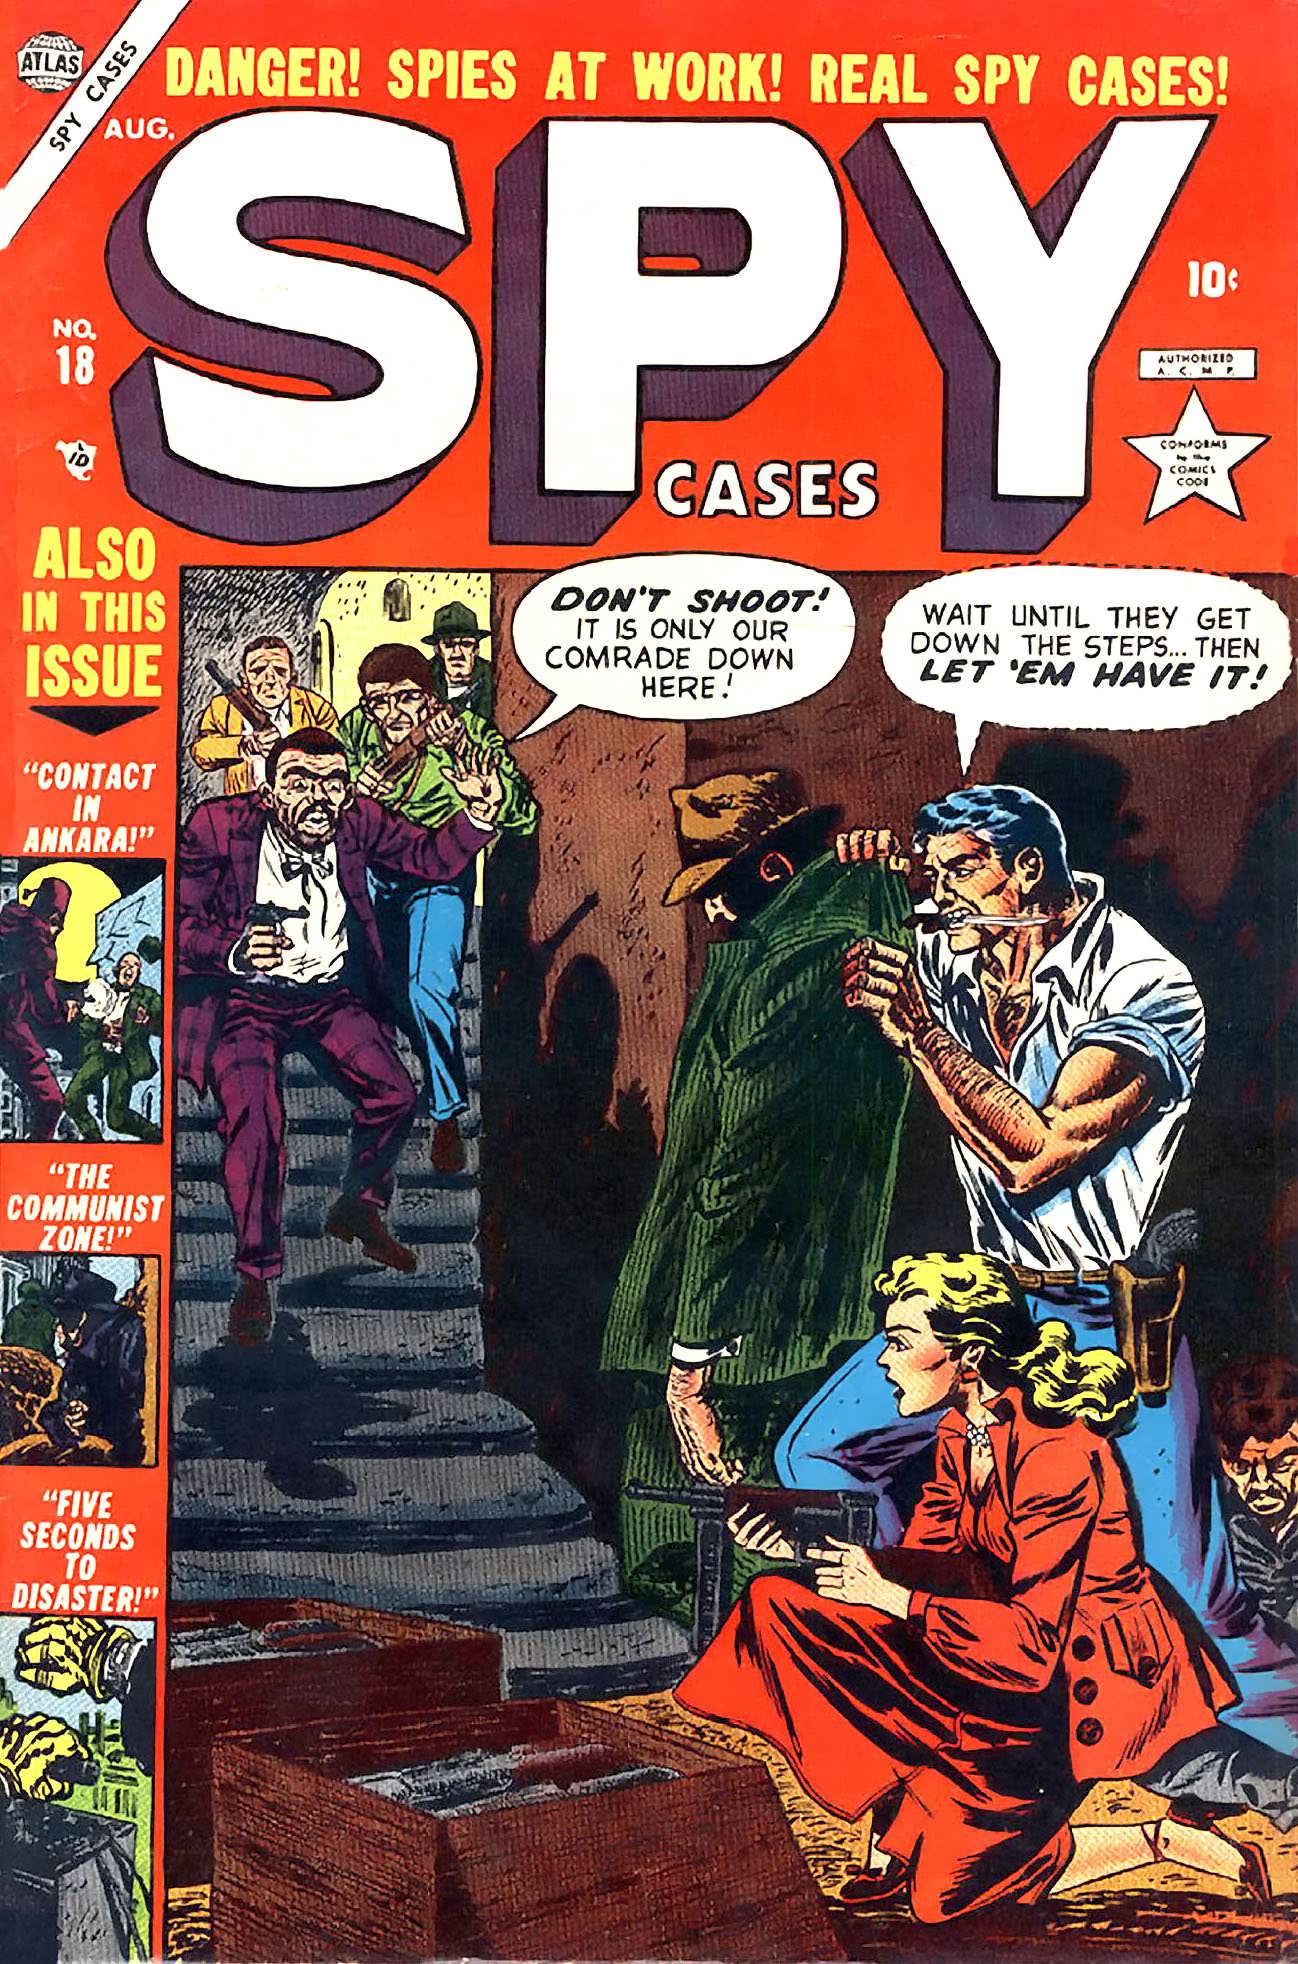 Read online Spy Cases comic -  Issue #18 - 1